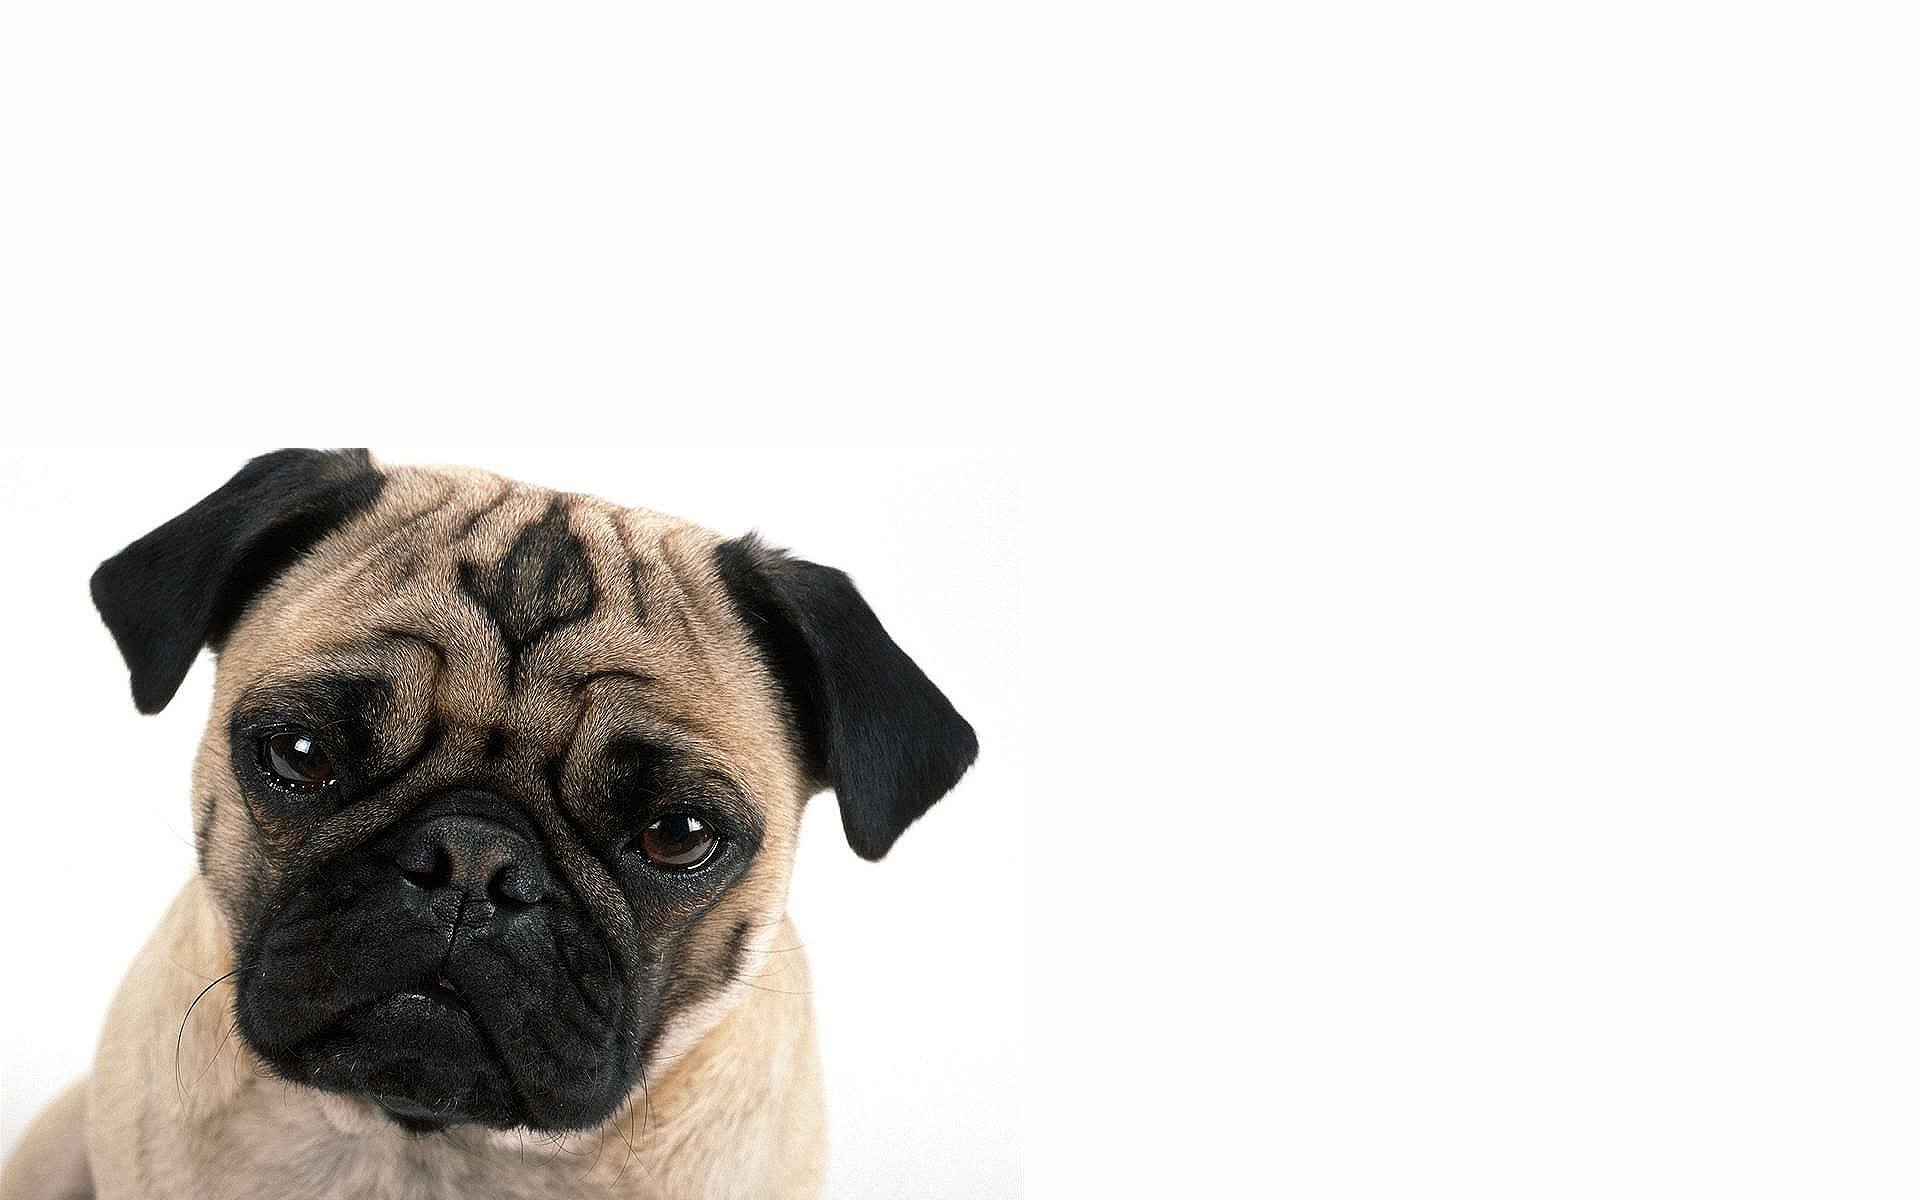 Animals dogs pug wallpapers hd desktop and mobile backgrounds